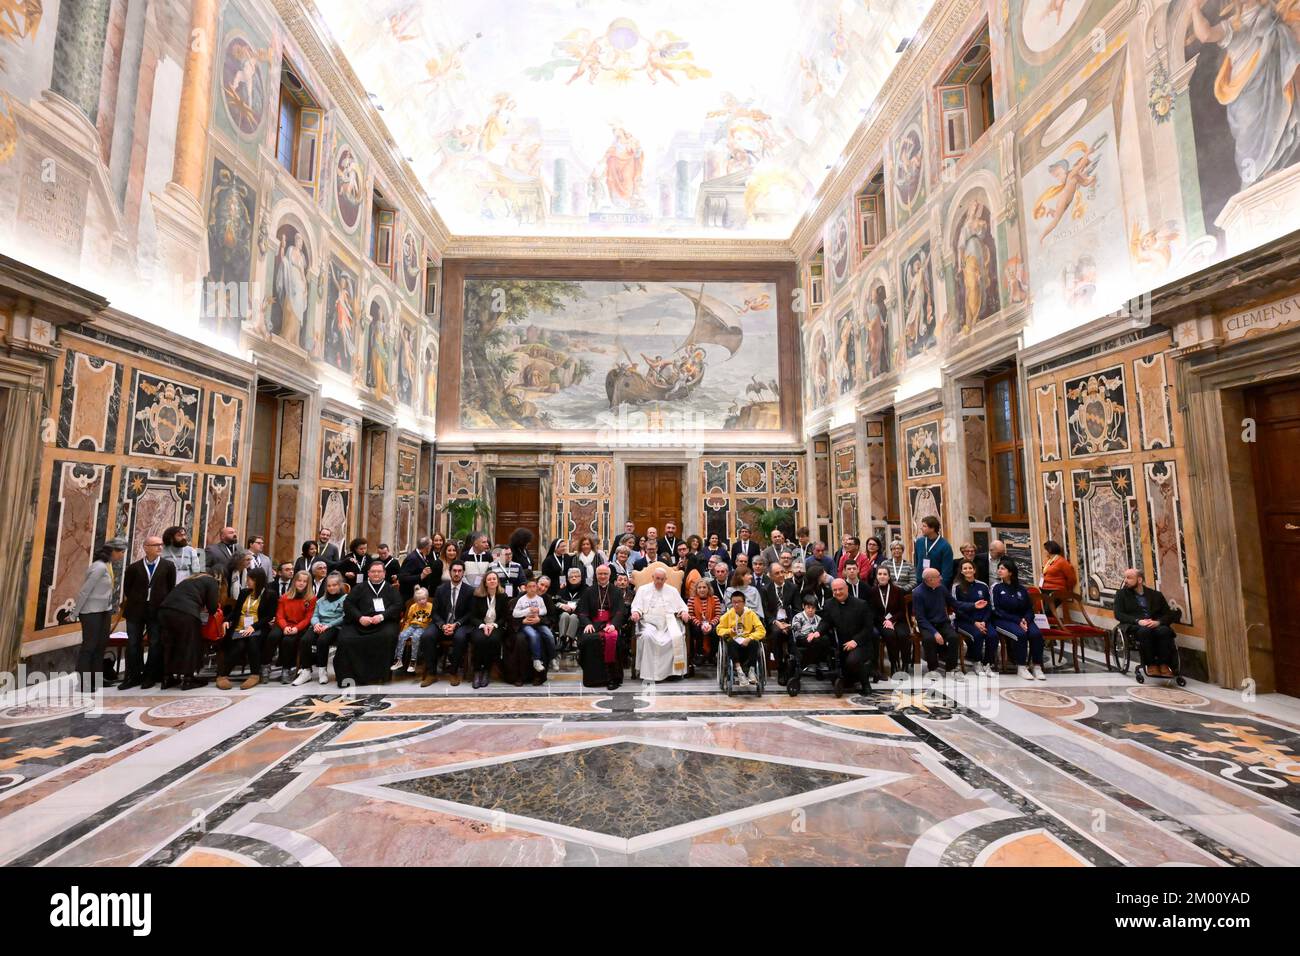 Vatican, Vatican. 03rd Dec, 2022. Italy, Rome, Vatican, 22/12/3 Pope Francis receives in audience Disabled People's Group on the occasion of the International Day of Persons with Disabilities at the Vatican Photograph byVatican Media /Catholic Press Photo. RESTRICTED TO EDITORIAL USE - NO MARKETING - NO ADVERTISING CAMPAIGNS Credit: Independent Photo Agency/Alamy Live News Stock Photo